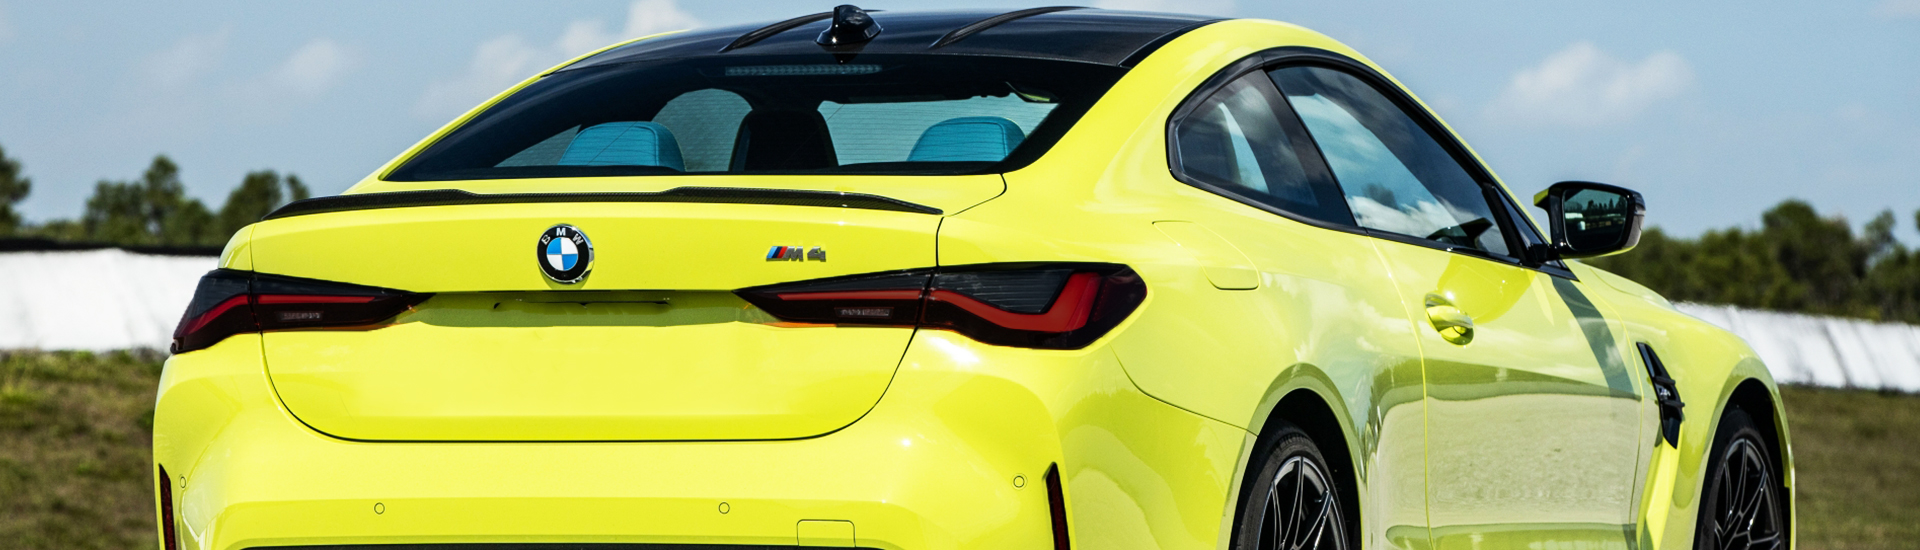 BMW M4 Tail Light Tint Covers